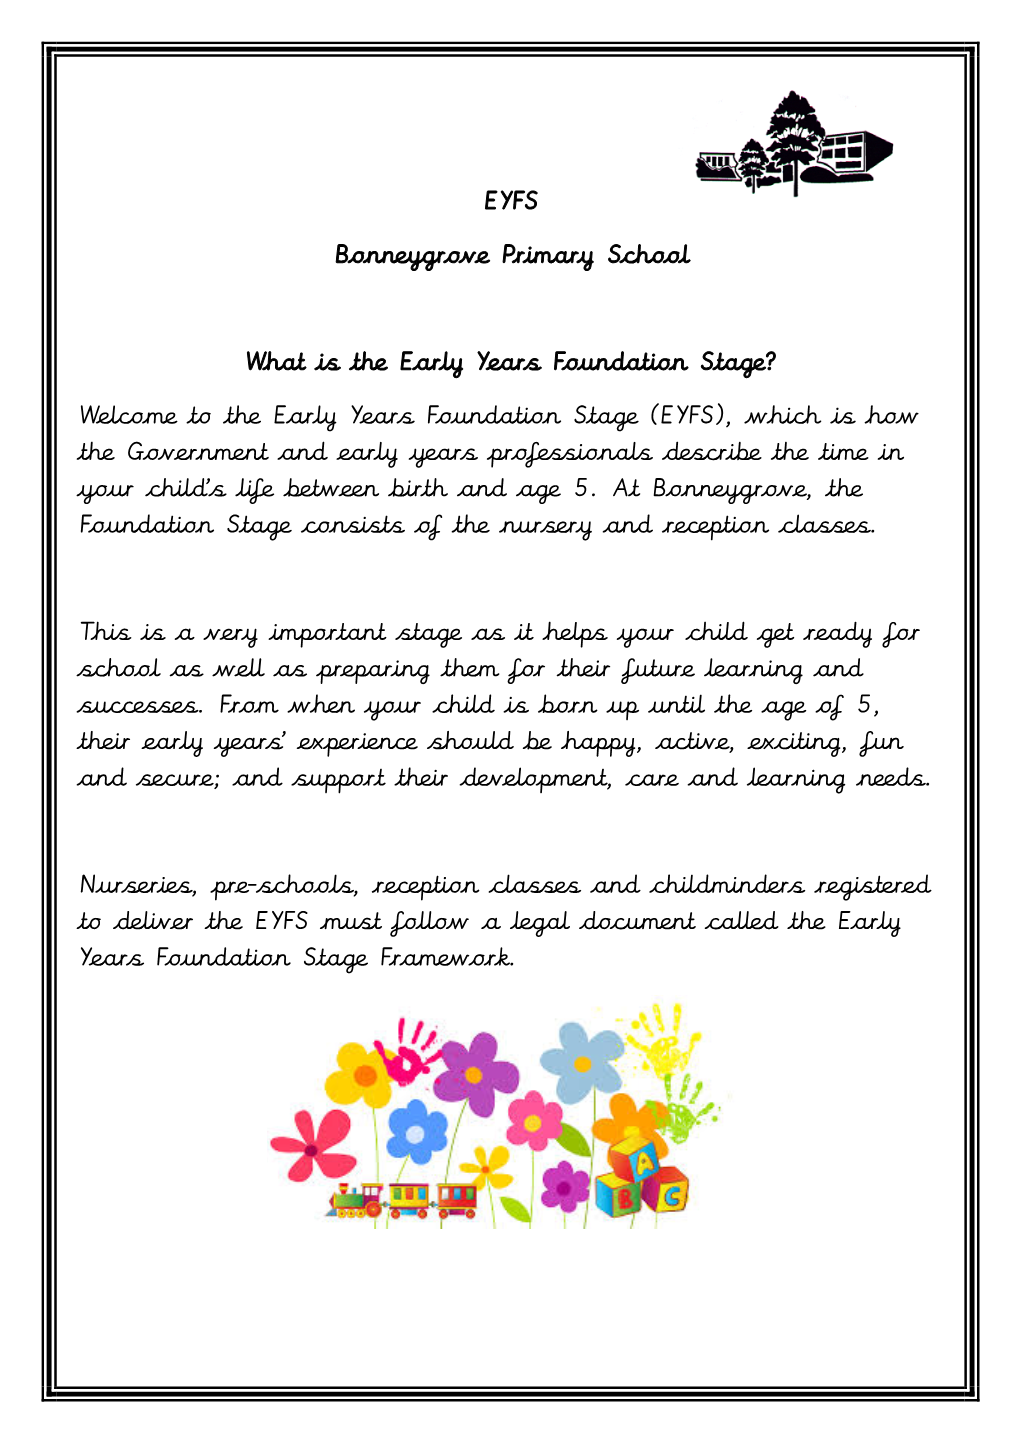 What Is the Early Years Foundation Stage?